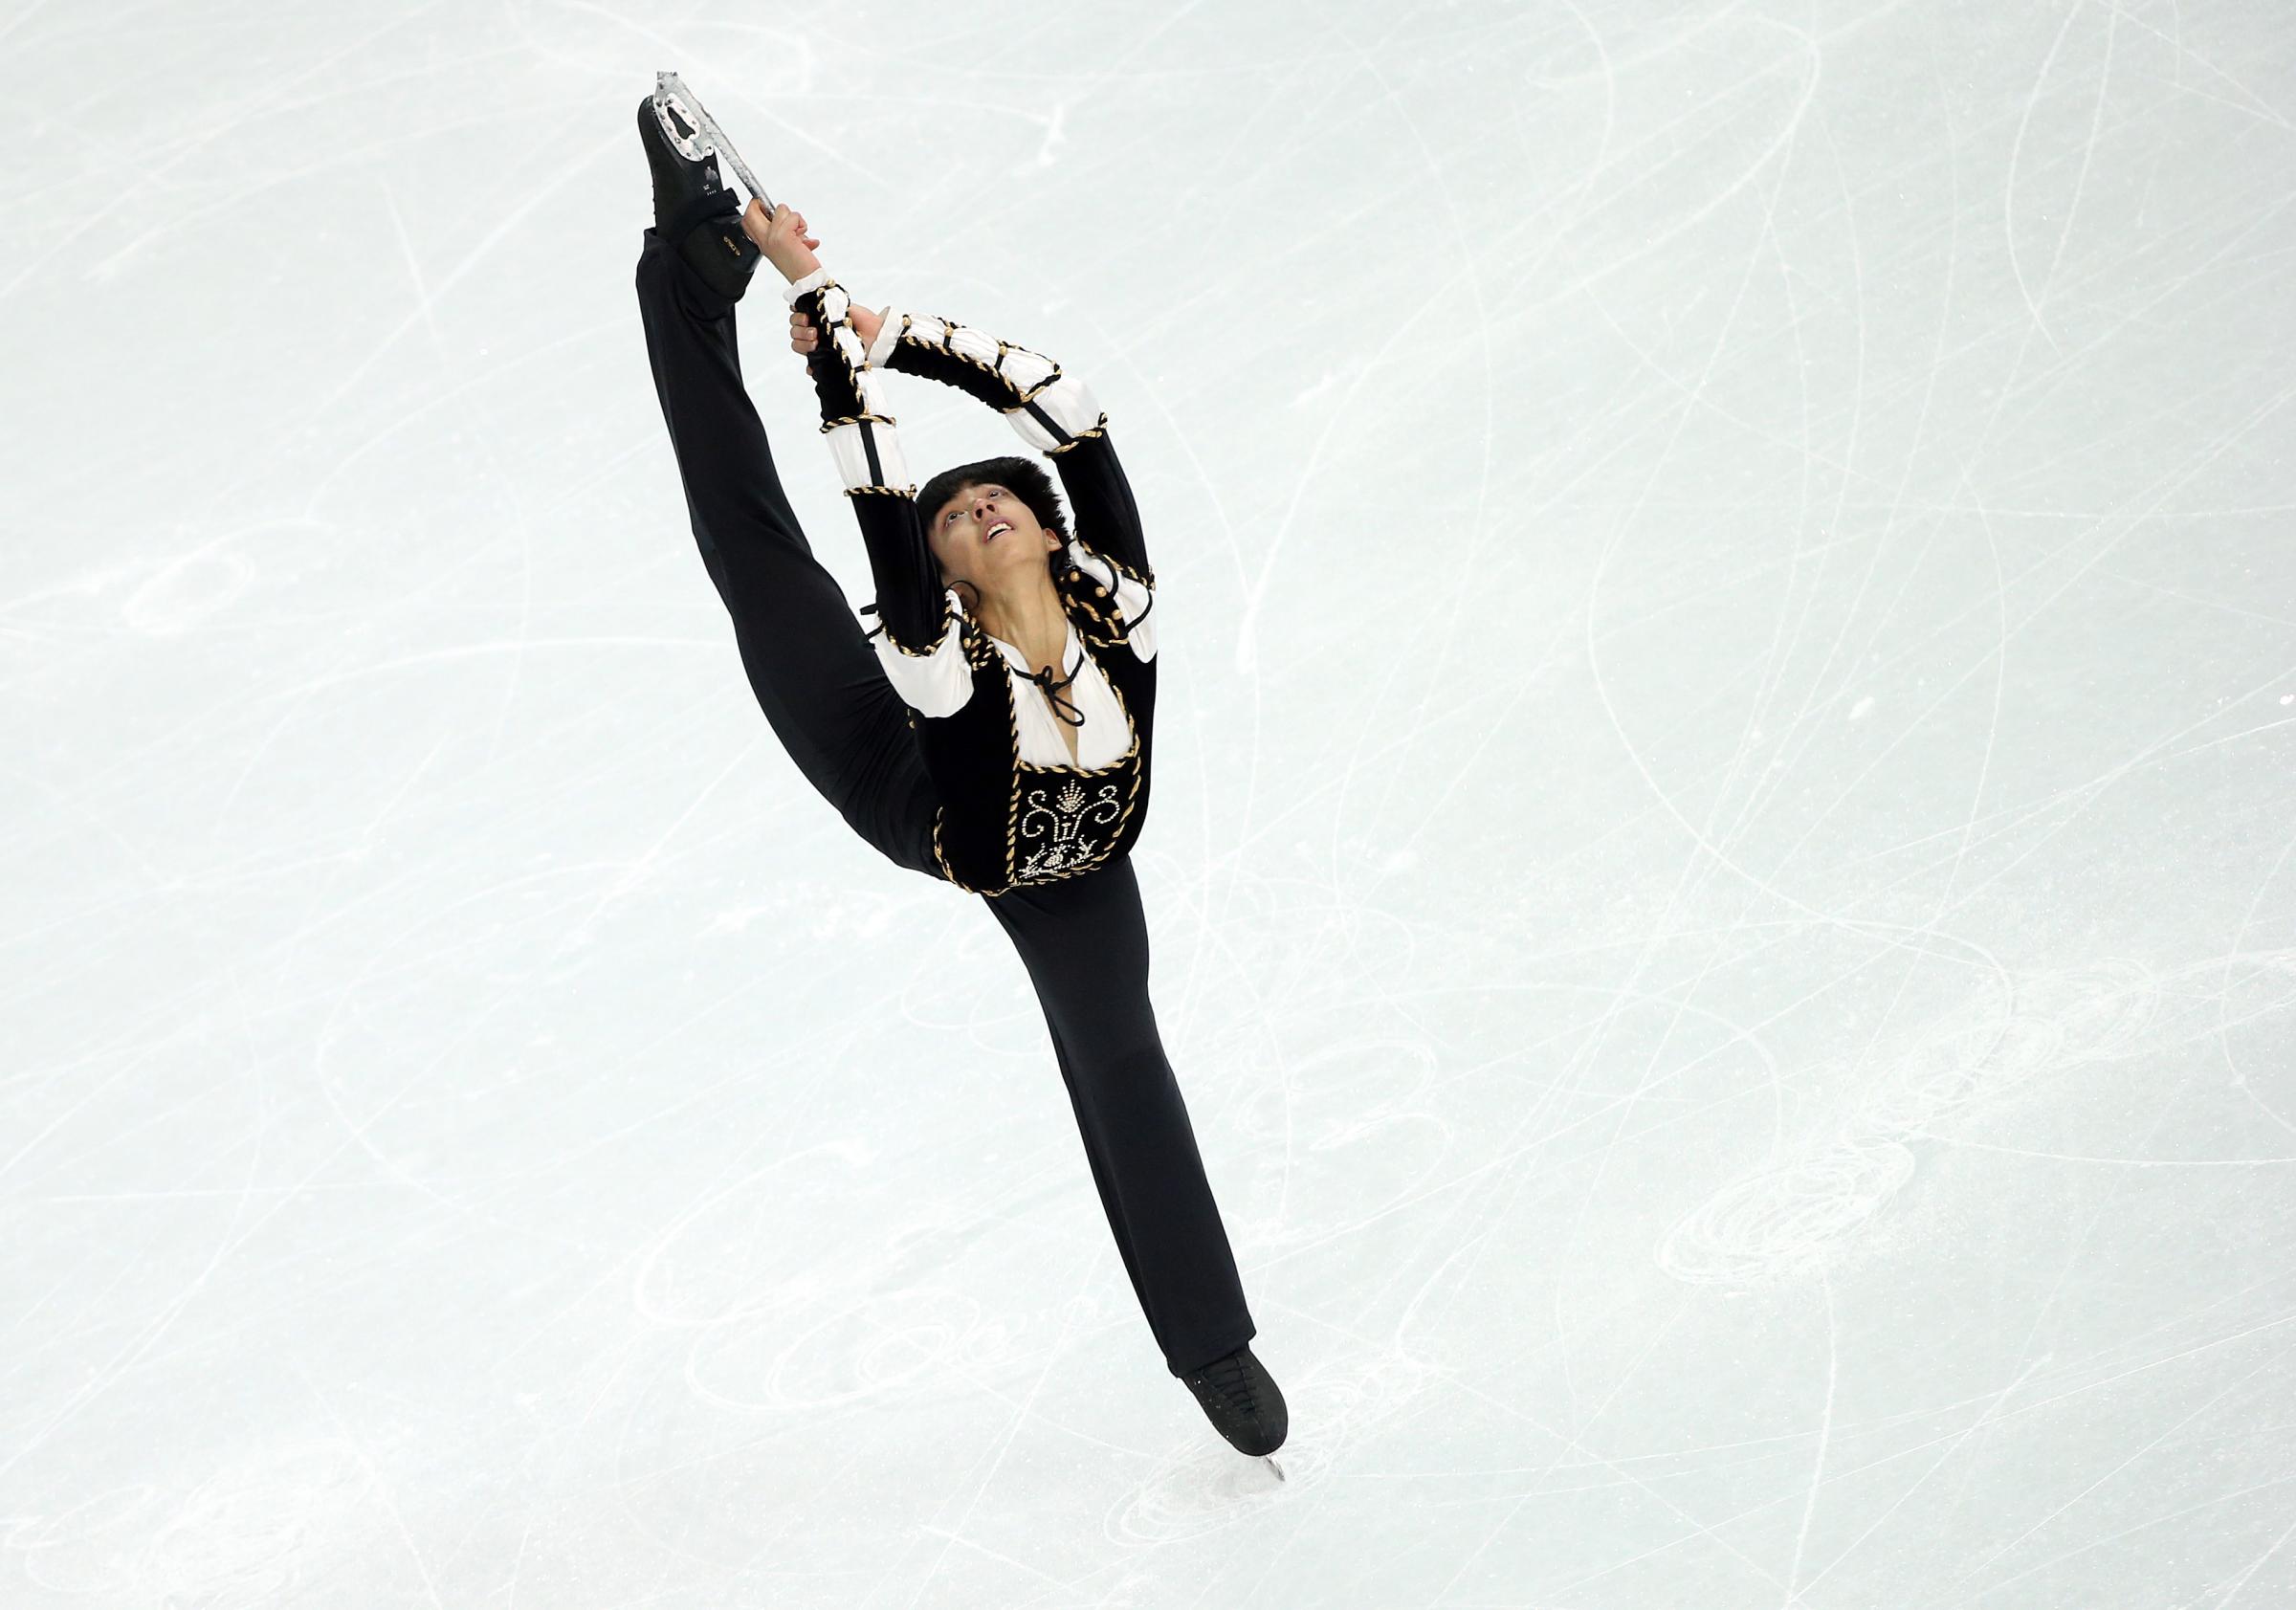 Michael Christian Martinez of Philippines performs during the Men's Short Program of the Figure Skating event. Seventeen-year-old Michael Christian Martinez is the first figure skater from the Philippines and the first skater from any tropical country to compete in the Olympics.